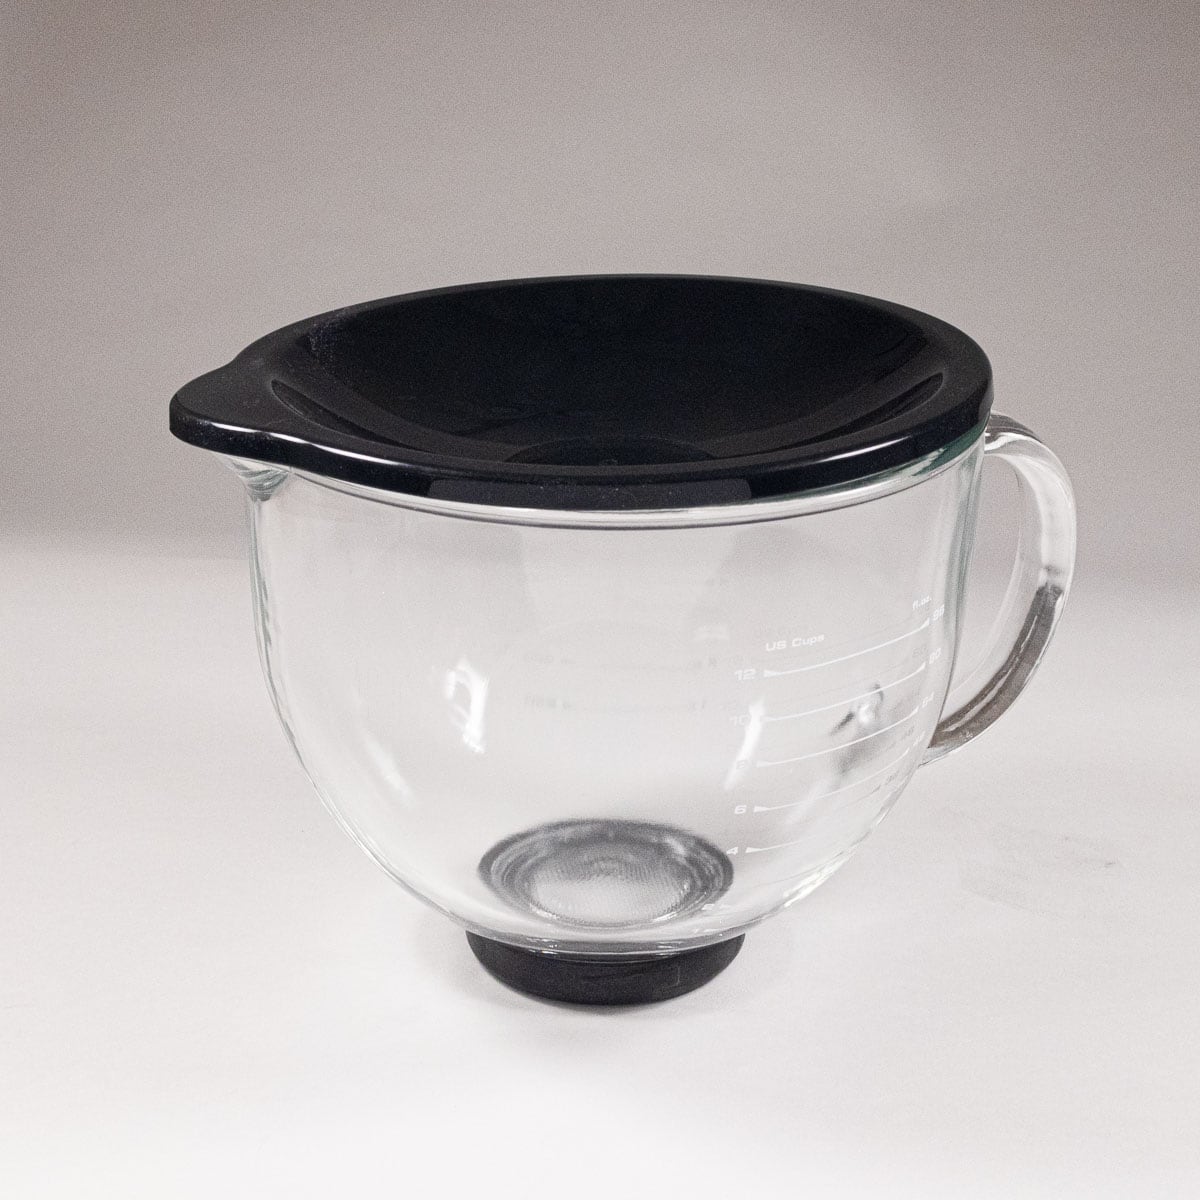 Glass bowl with a black plastic cover on top.